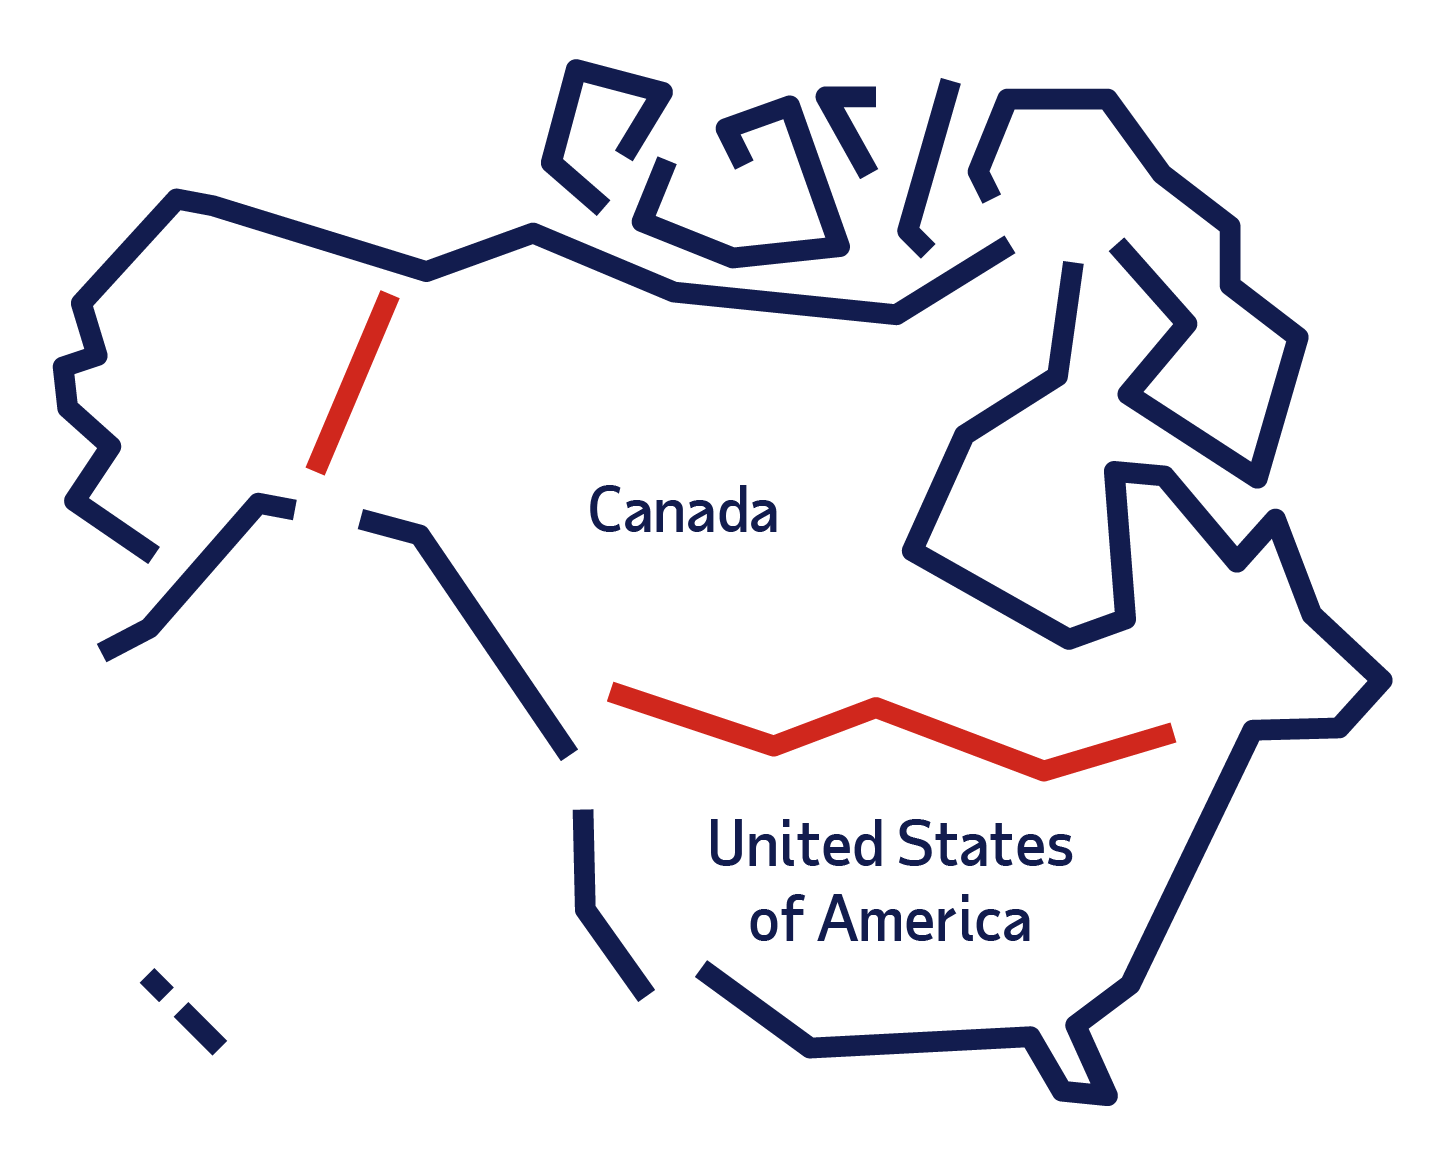 Map showing Canada and United States of America